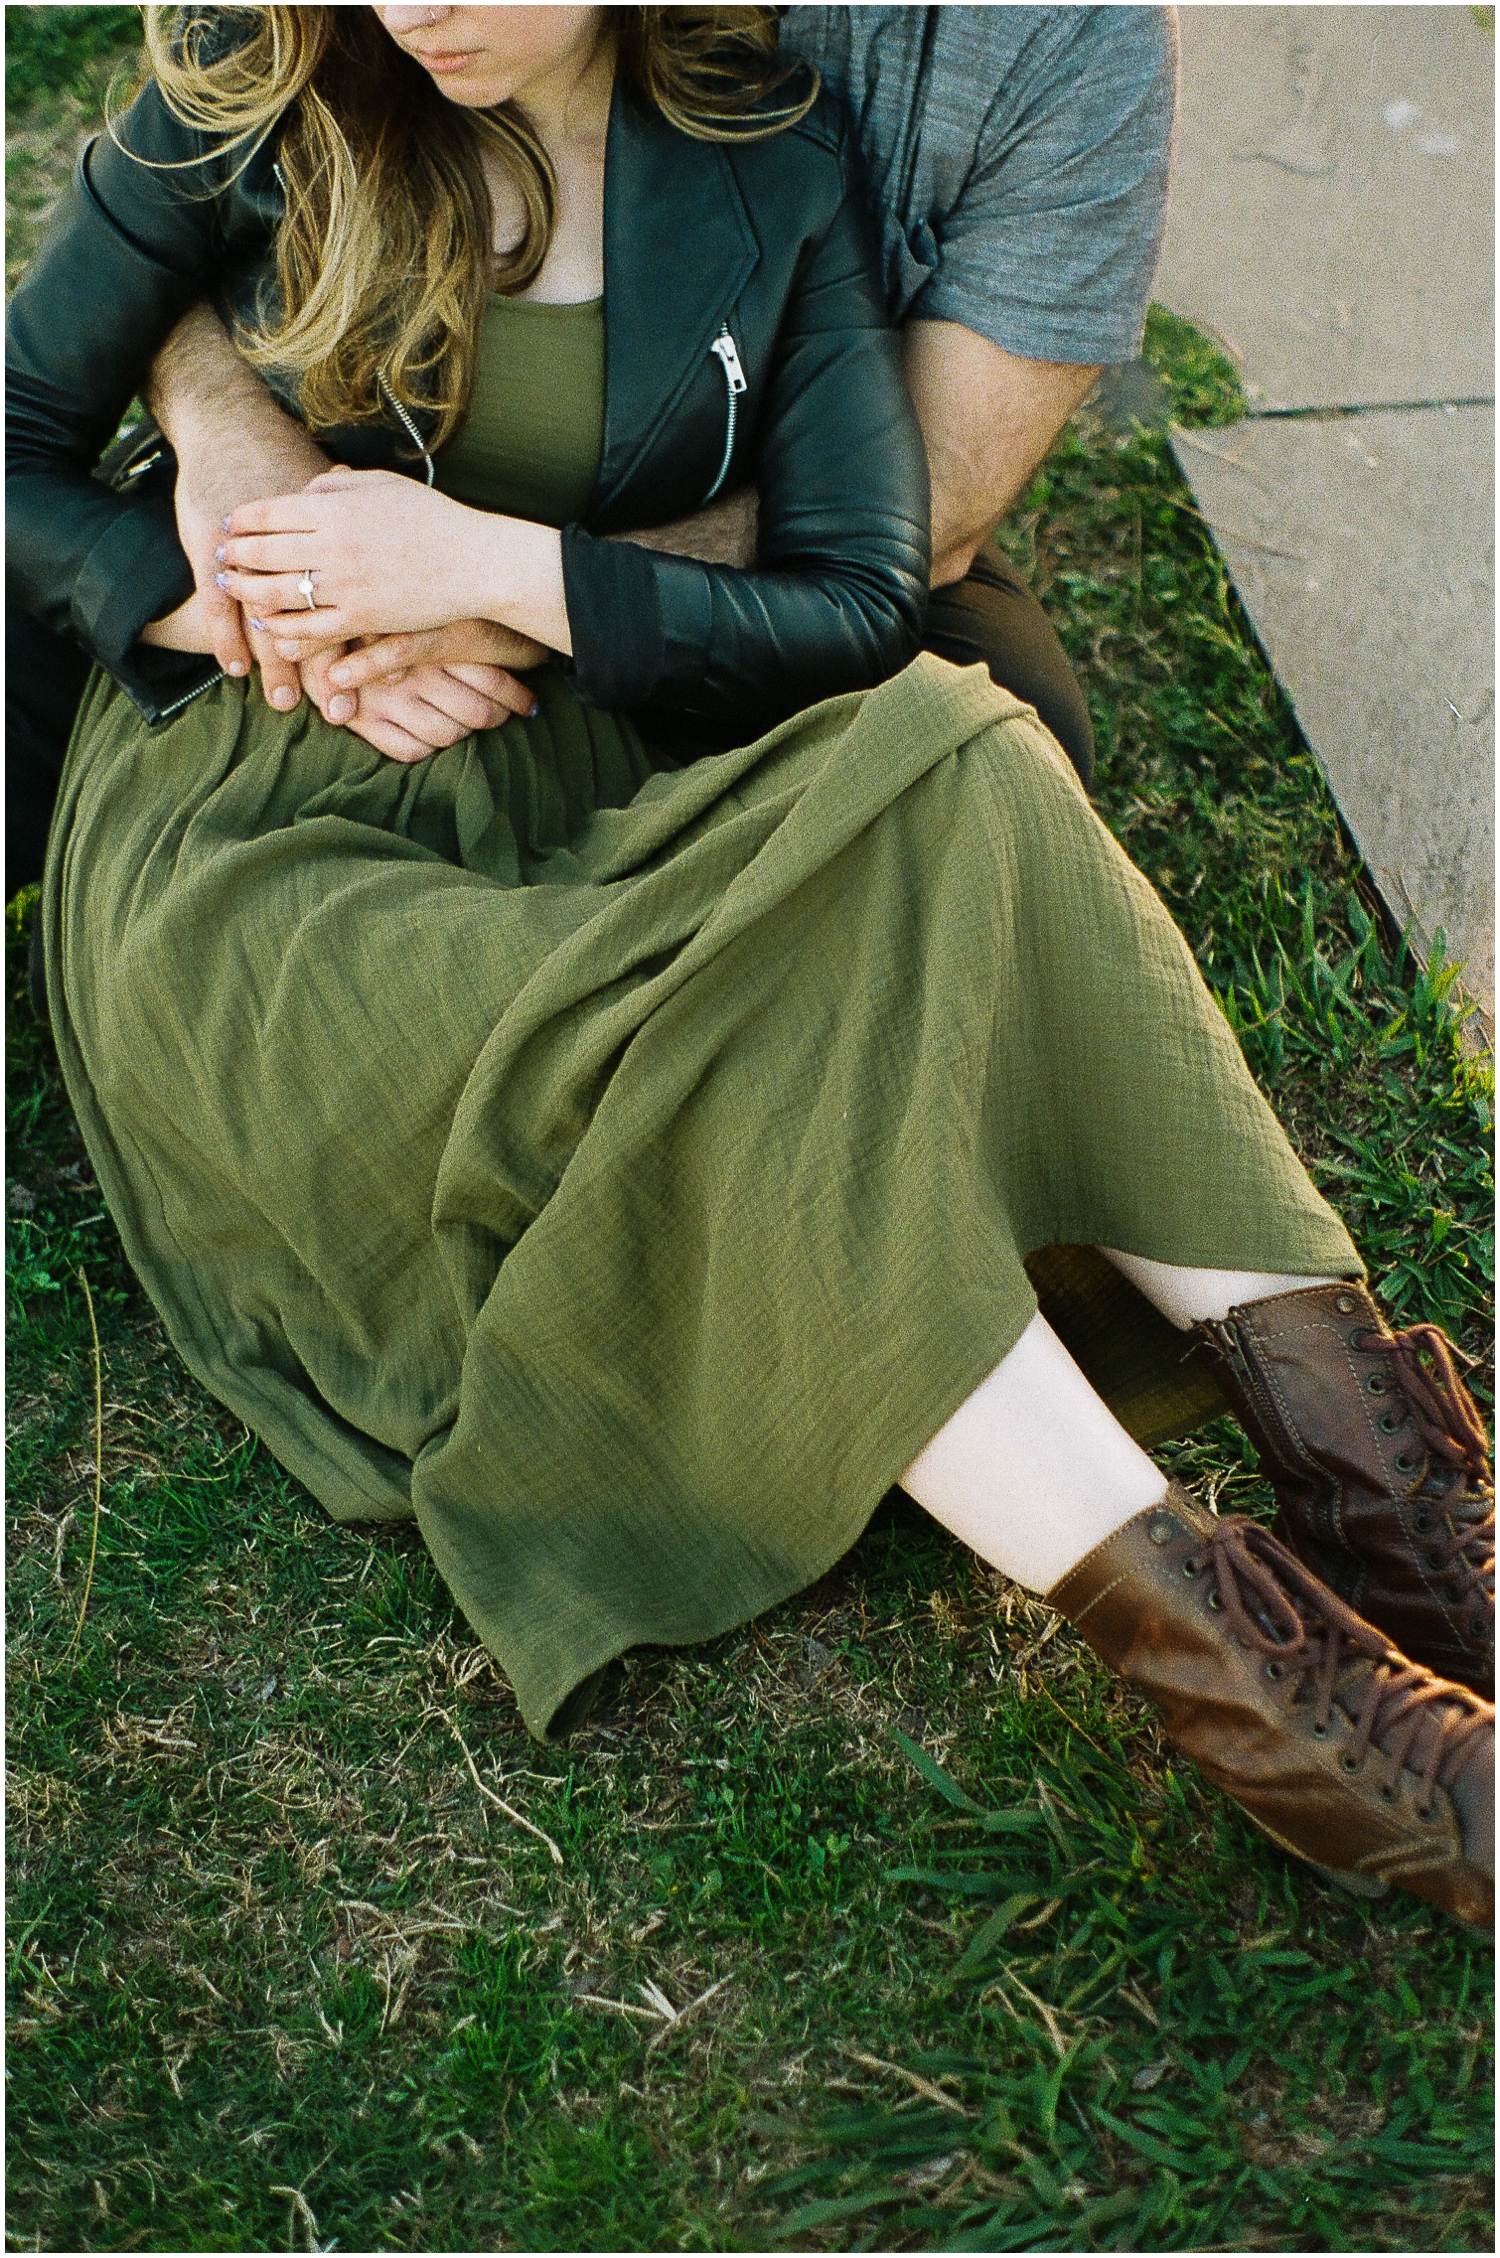 A woman in a green dress and brown boots sits on the grass leaning against a man with her engagement ring showing.